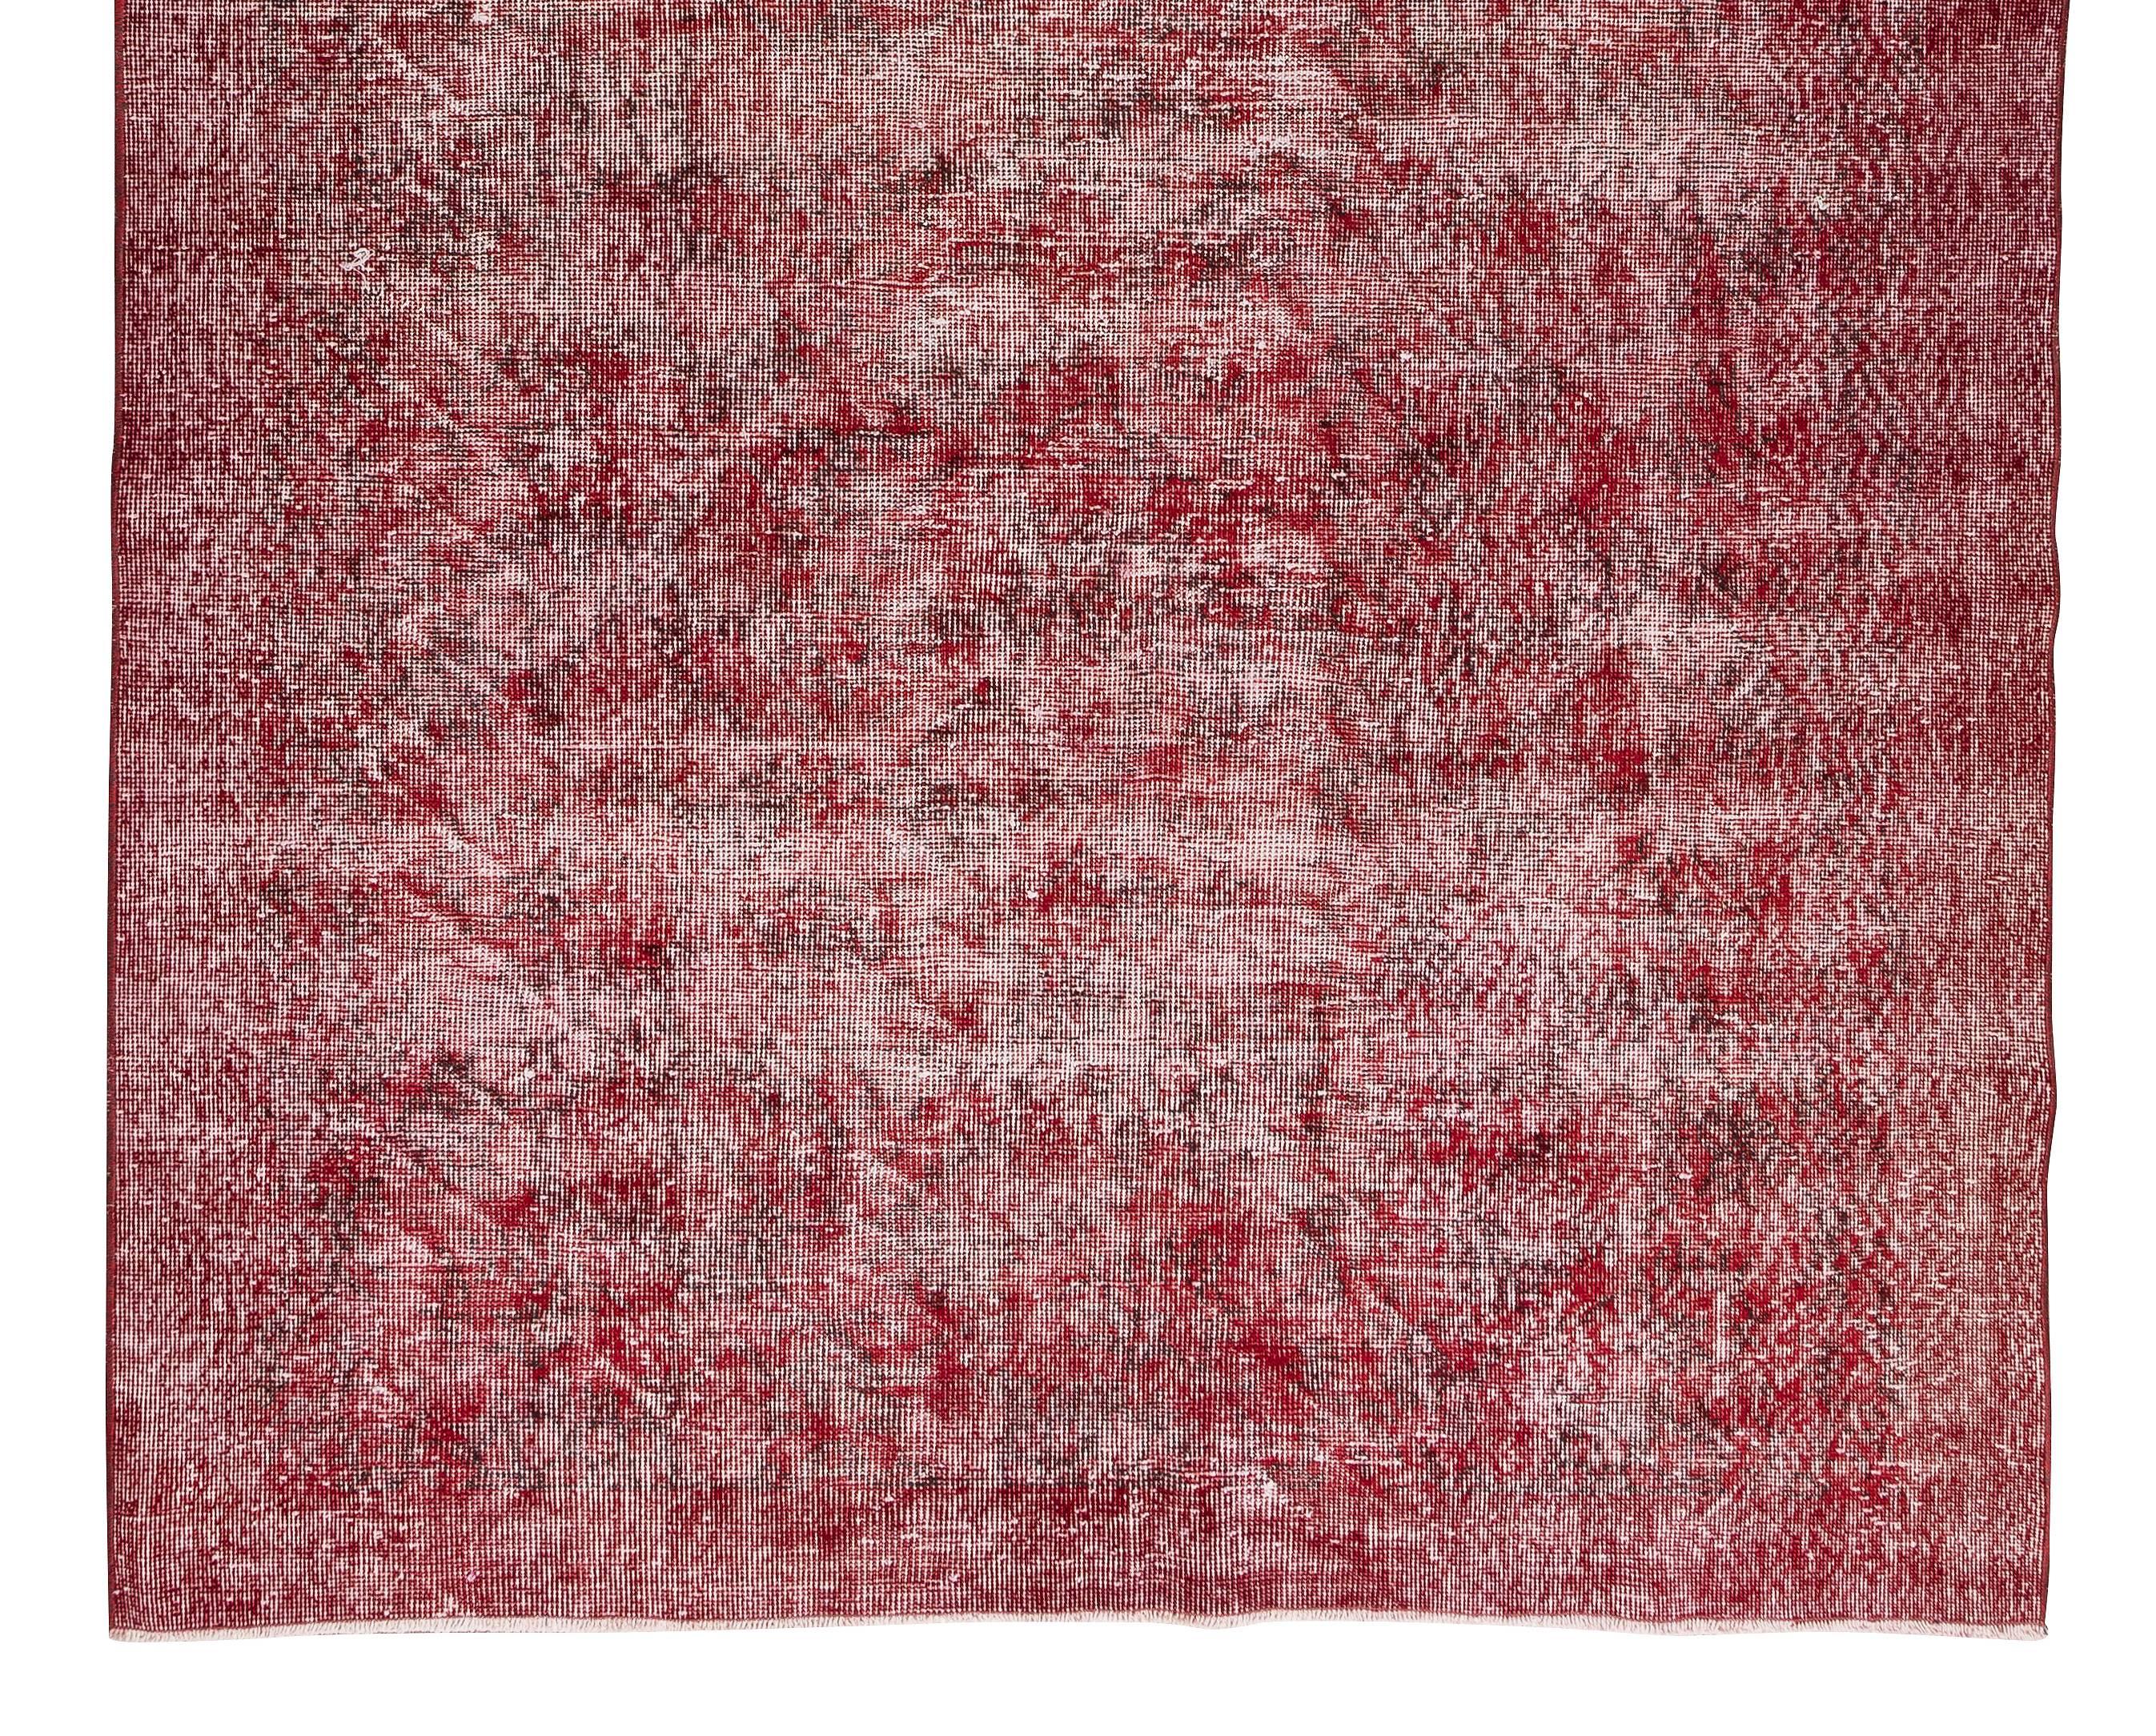 Handmade Turkish Area Rug in Burgundy Red, Shabby Chic Vintage Carpet In Good Condition For Sale In Philadelphia, PA